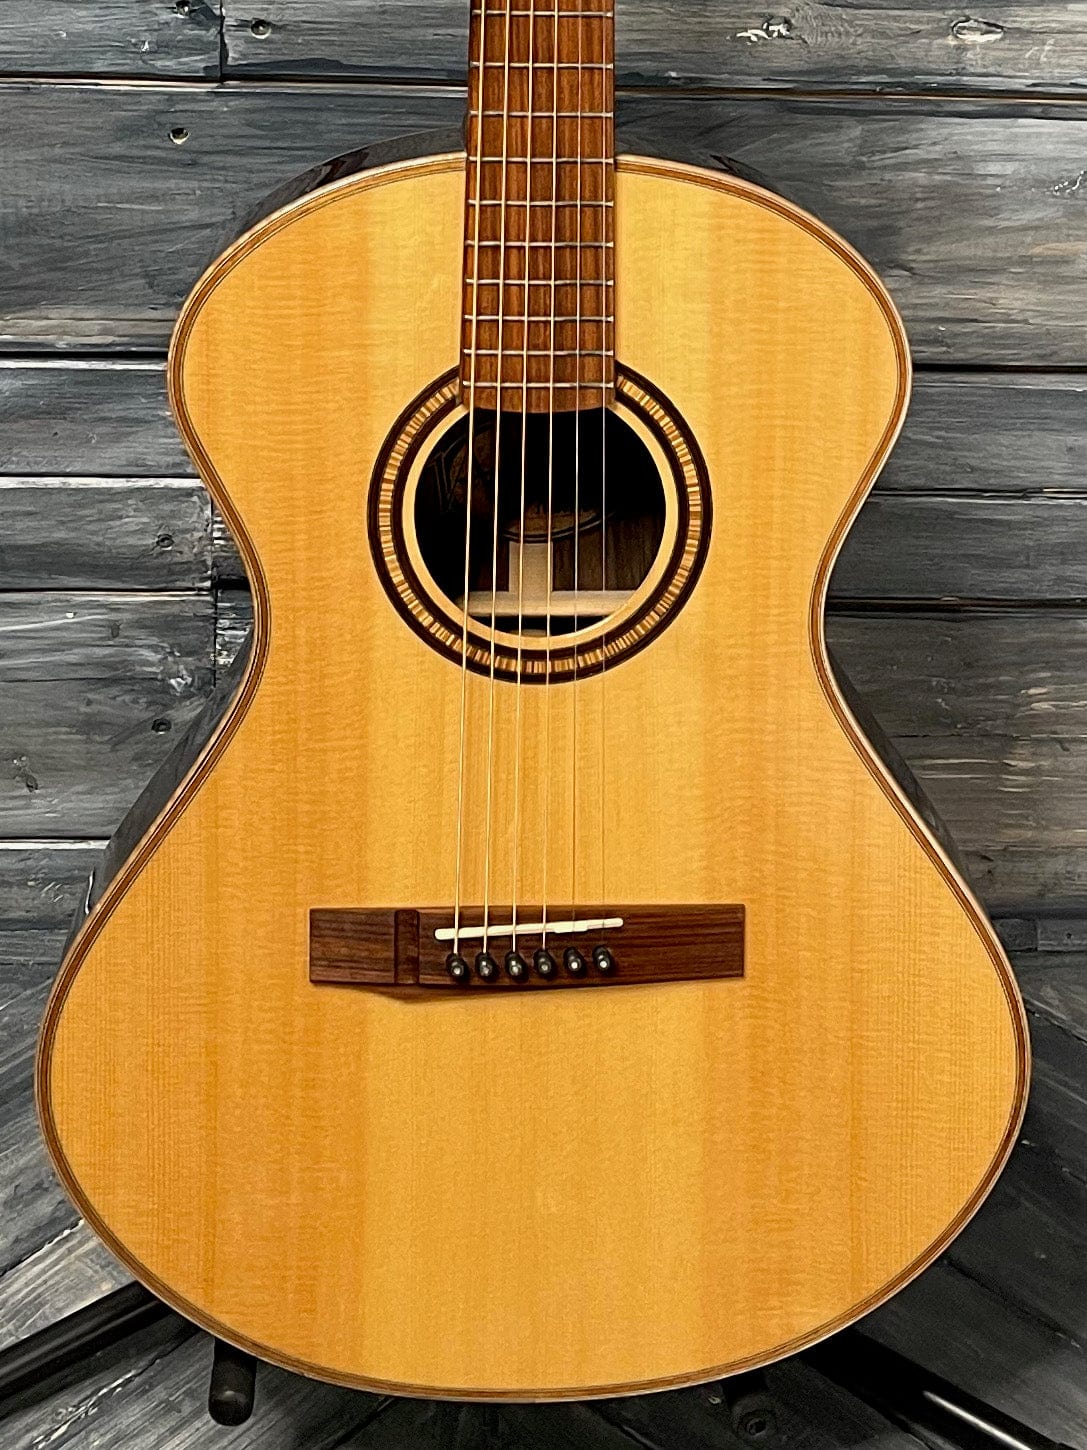 Andrew White Acoustic Guitar Used Andrew White Cybele 1010 Acoustic Guitar with Case - Natural